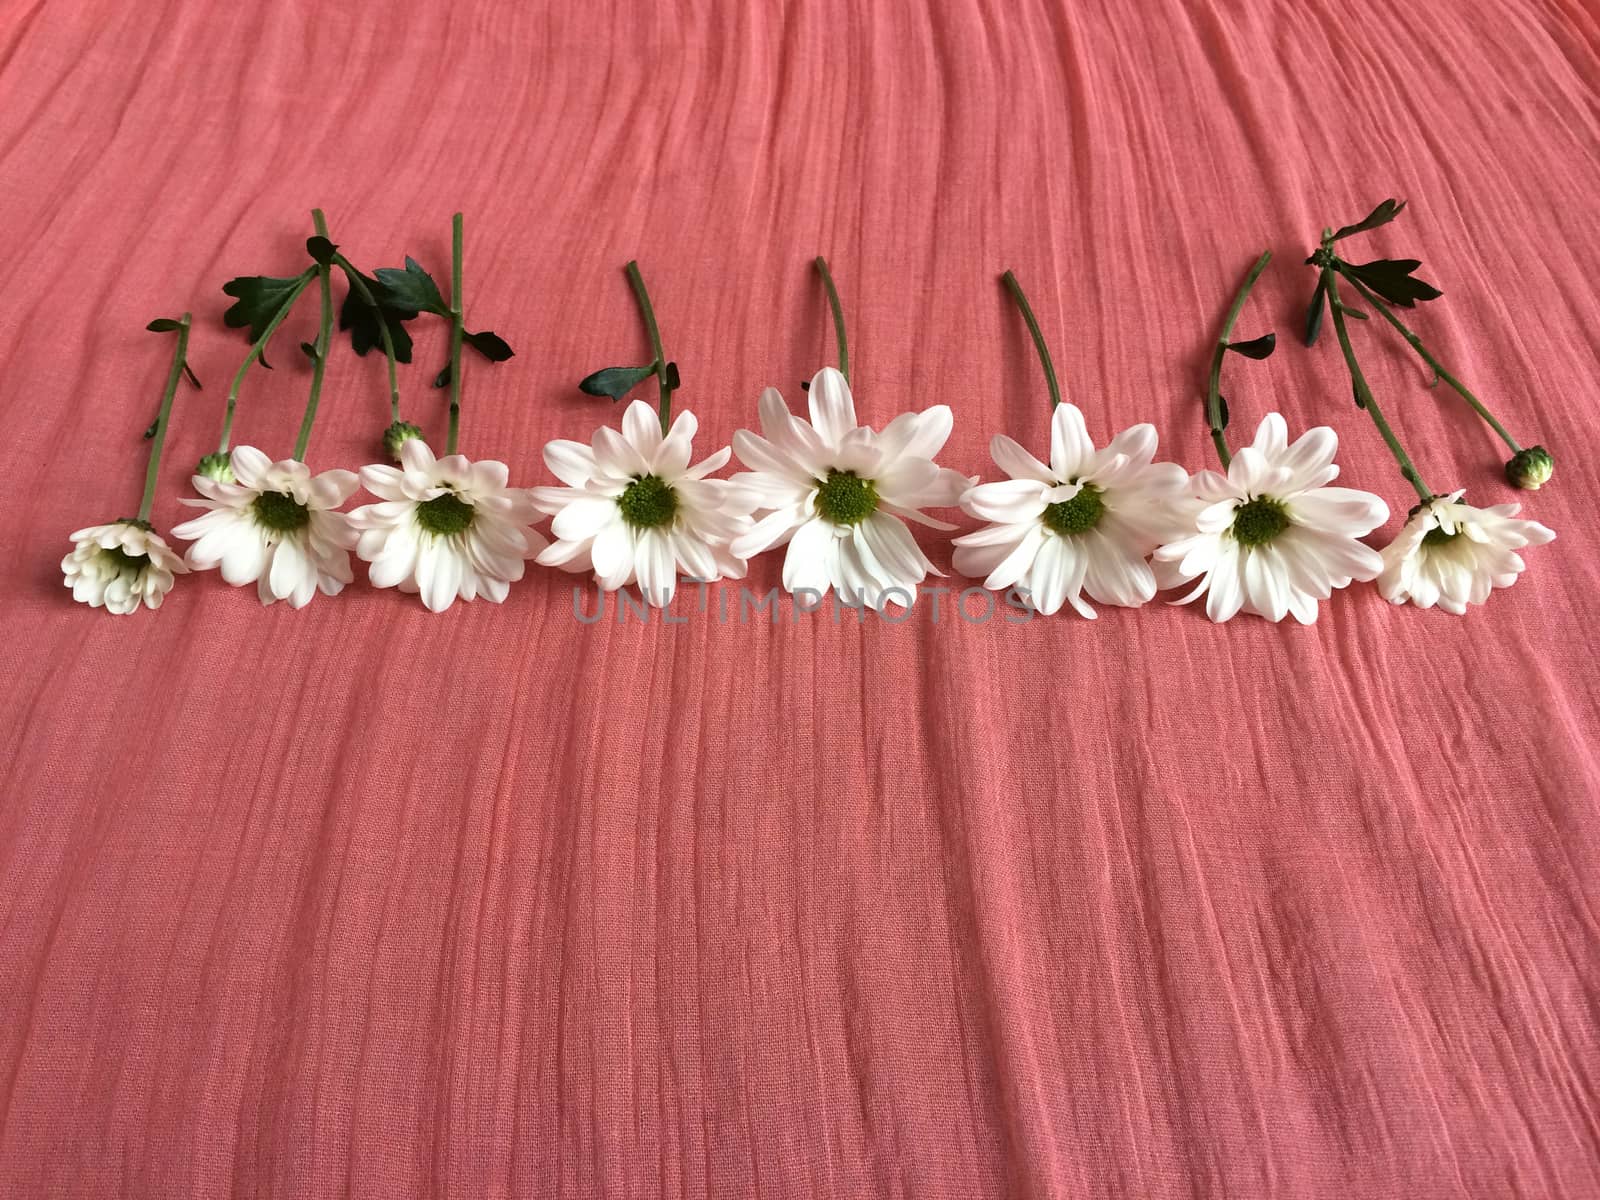 Cut white daisies on a pink colored background